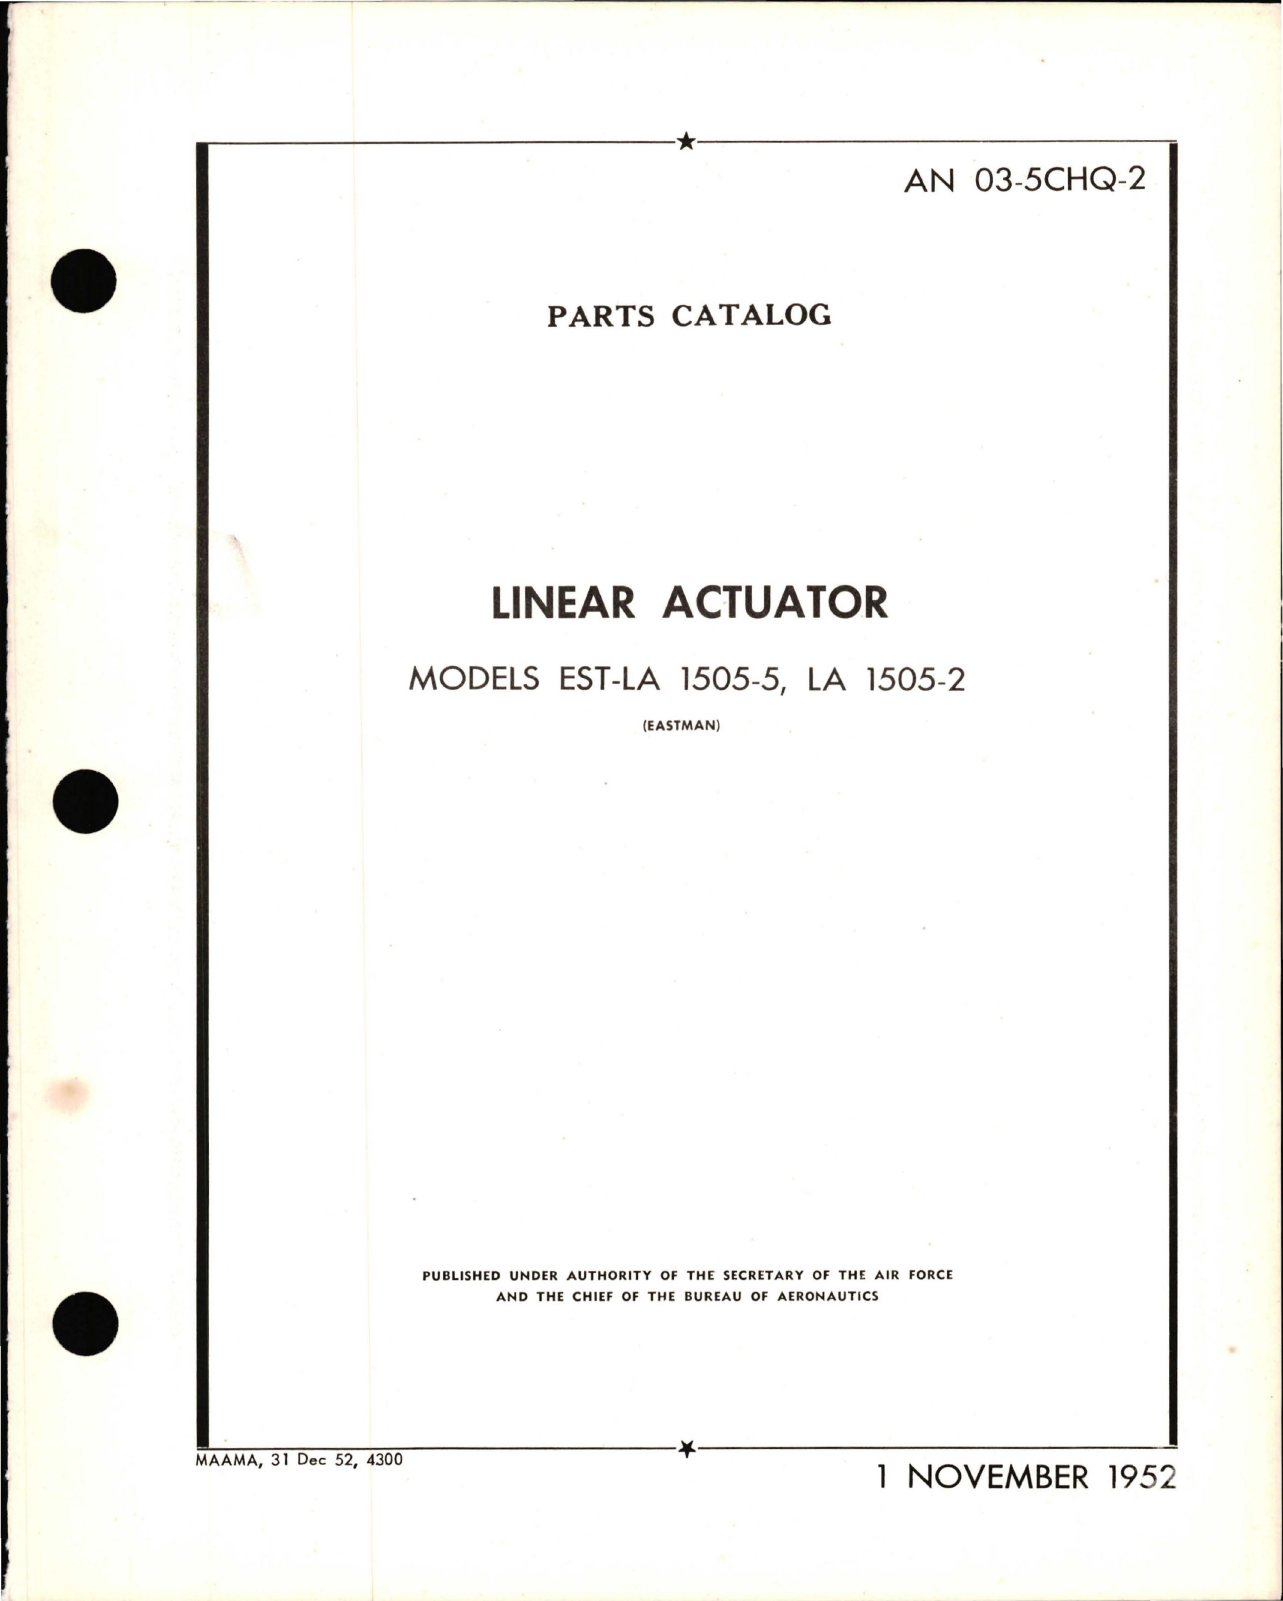 Sample page 1 from AirCorps Library document: Parts Catalog for Linear Actuator Models LA 1505-5 and LA 1505-2